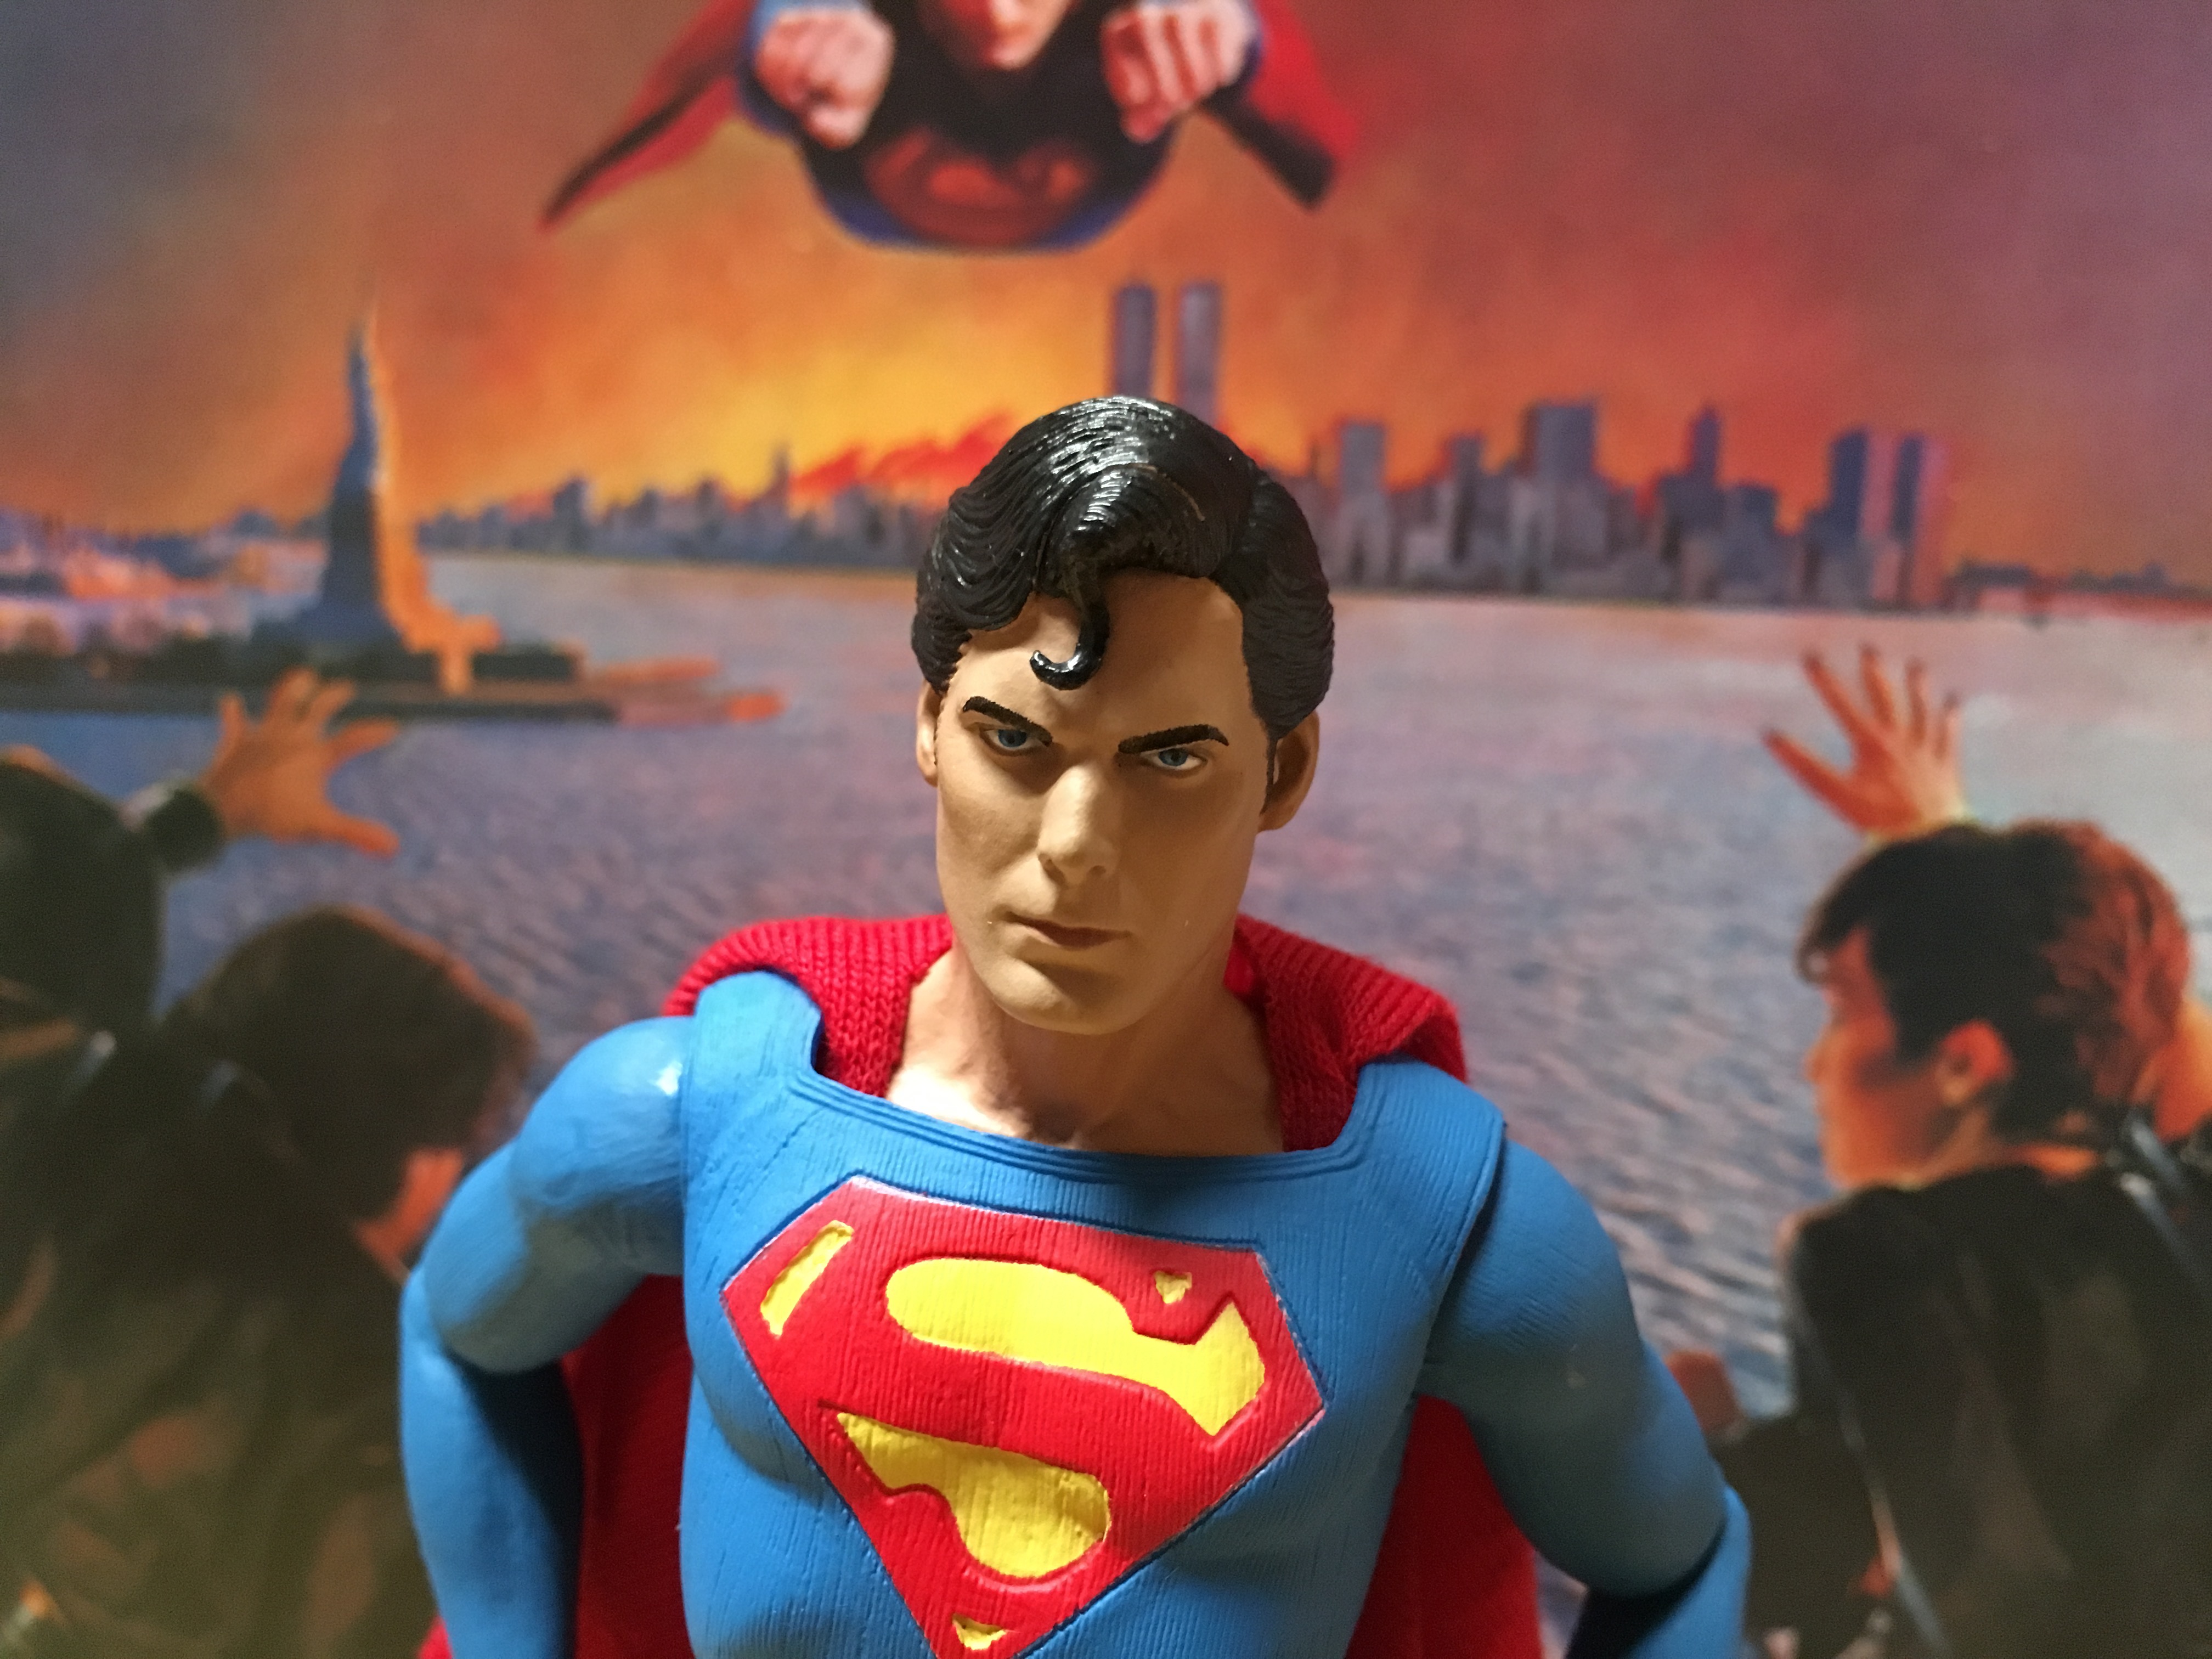 NECA Christopher Reeve SUPERMAN 1978 DC COMICS 7” Action Figure Collection Model 